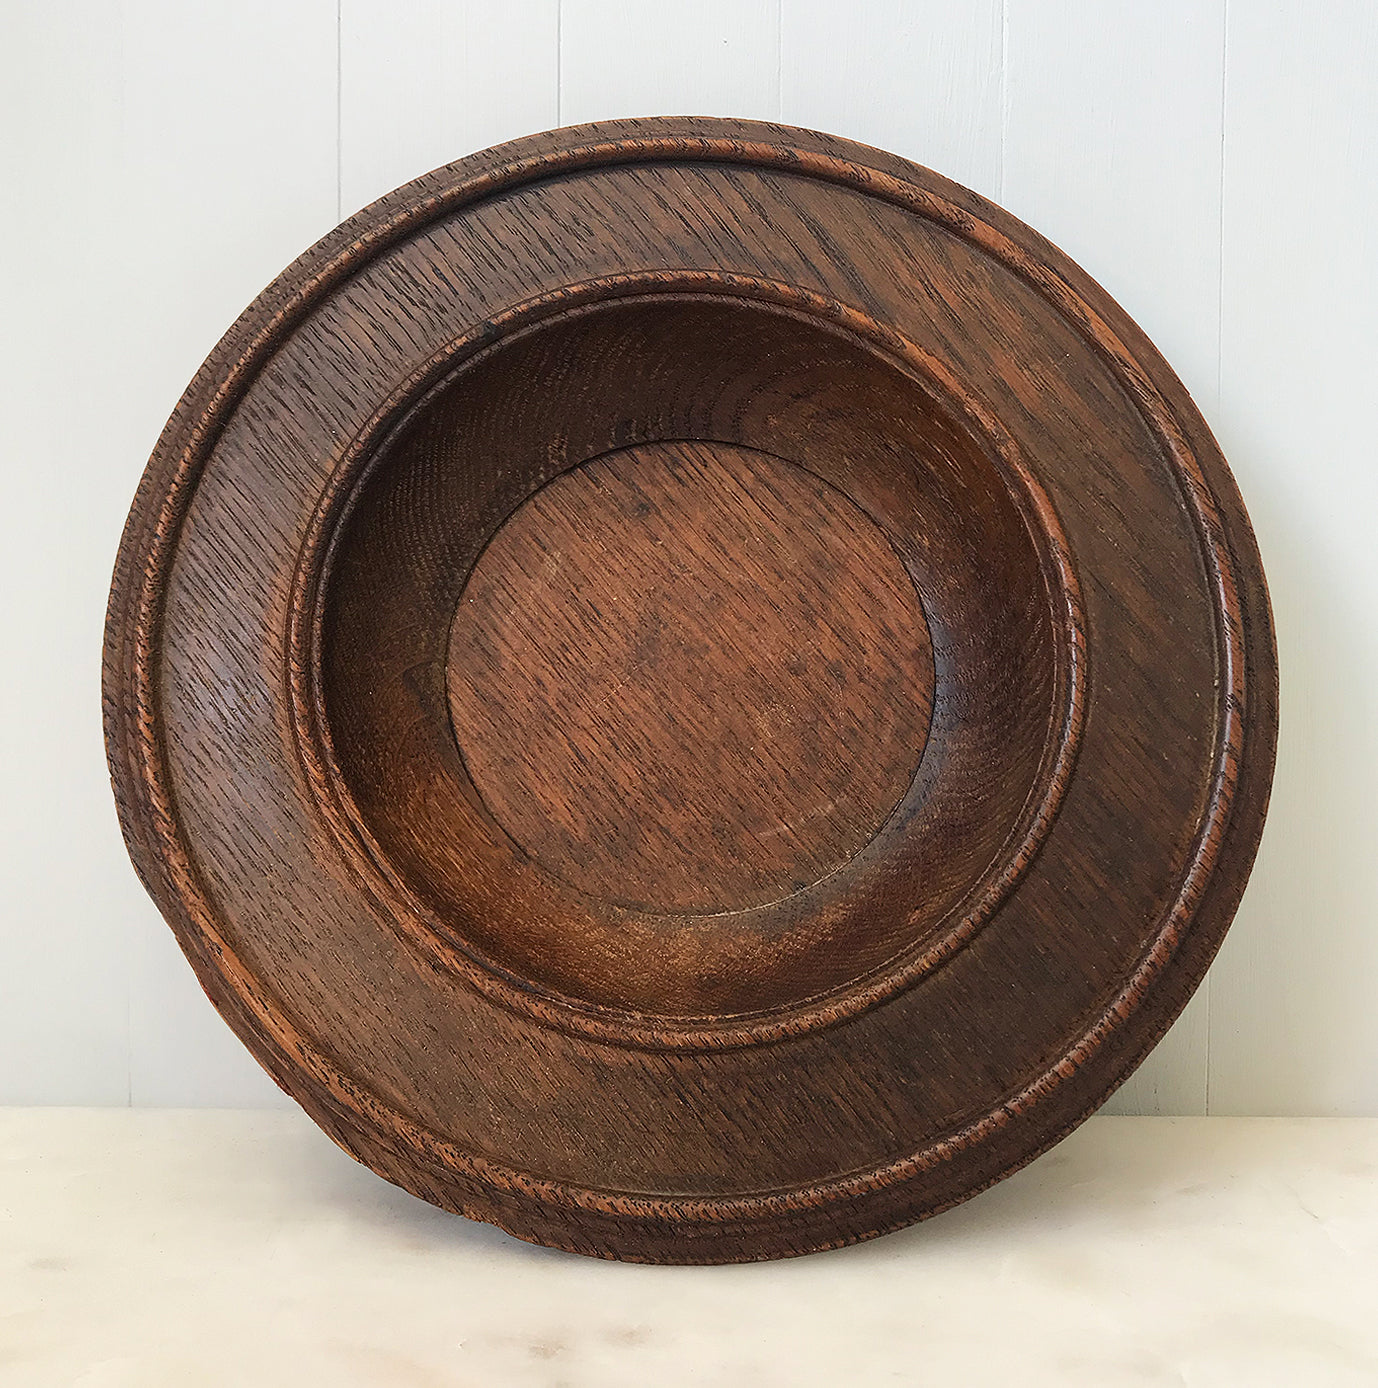 Solid oak church collection plate C.1930 - BUY NOW - www.intovintage.co.uk